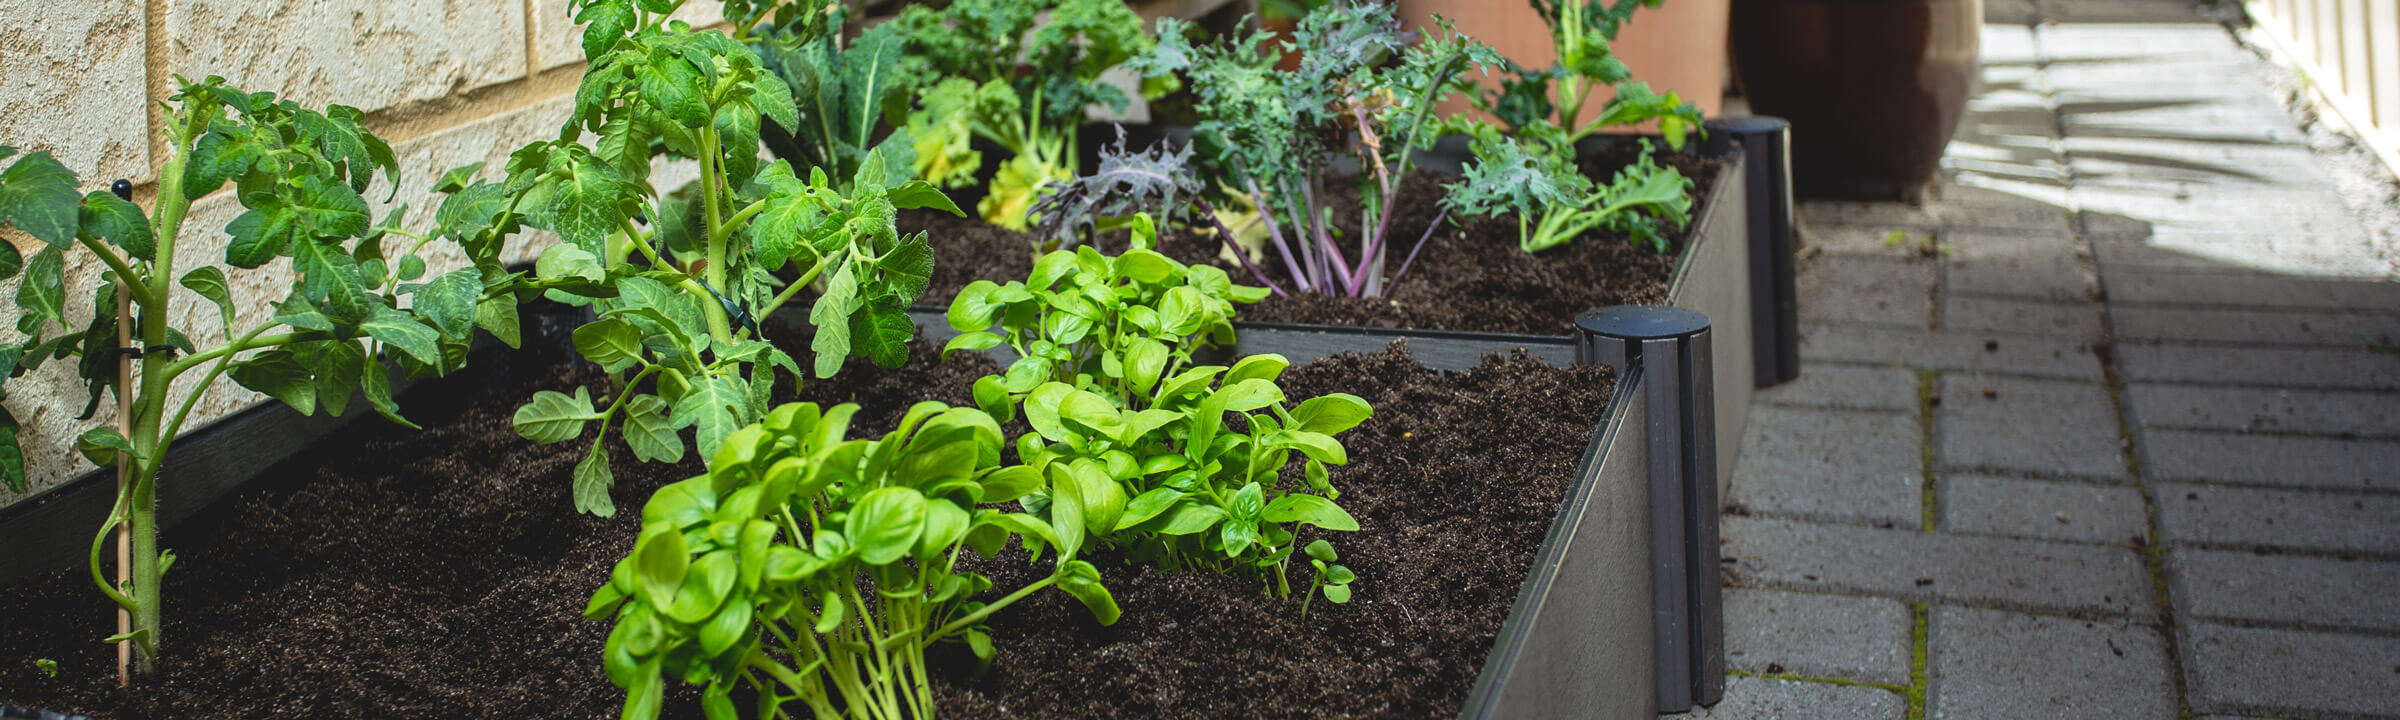 Grow-your-own-vegetables-with-a-Raised-Garden-Bed